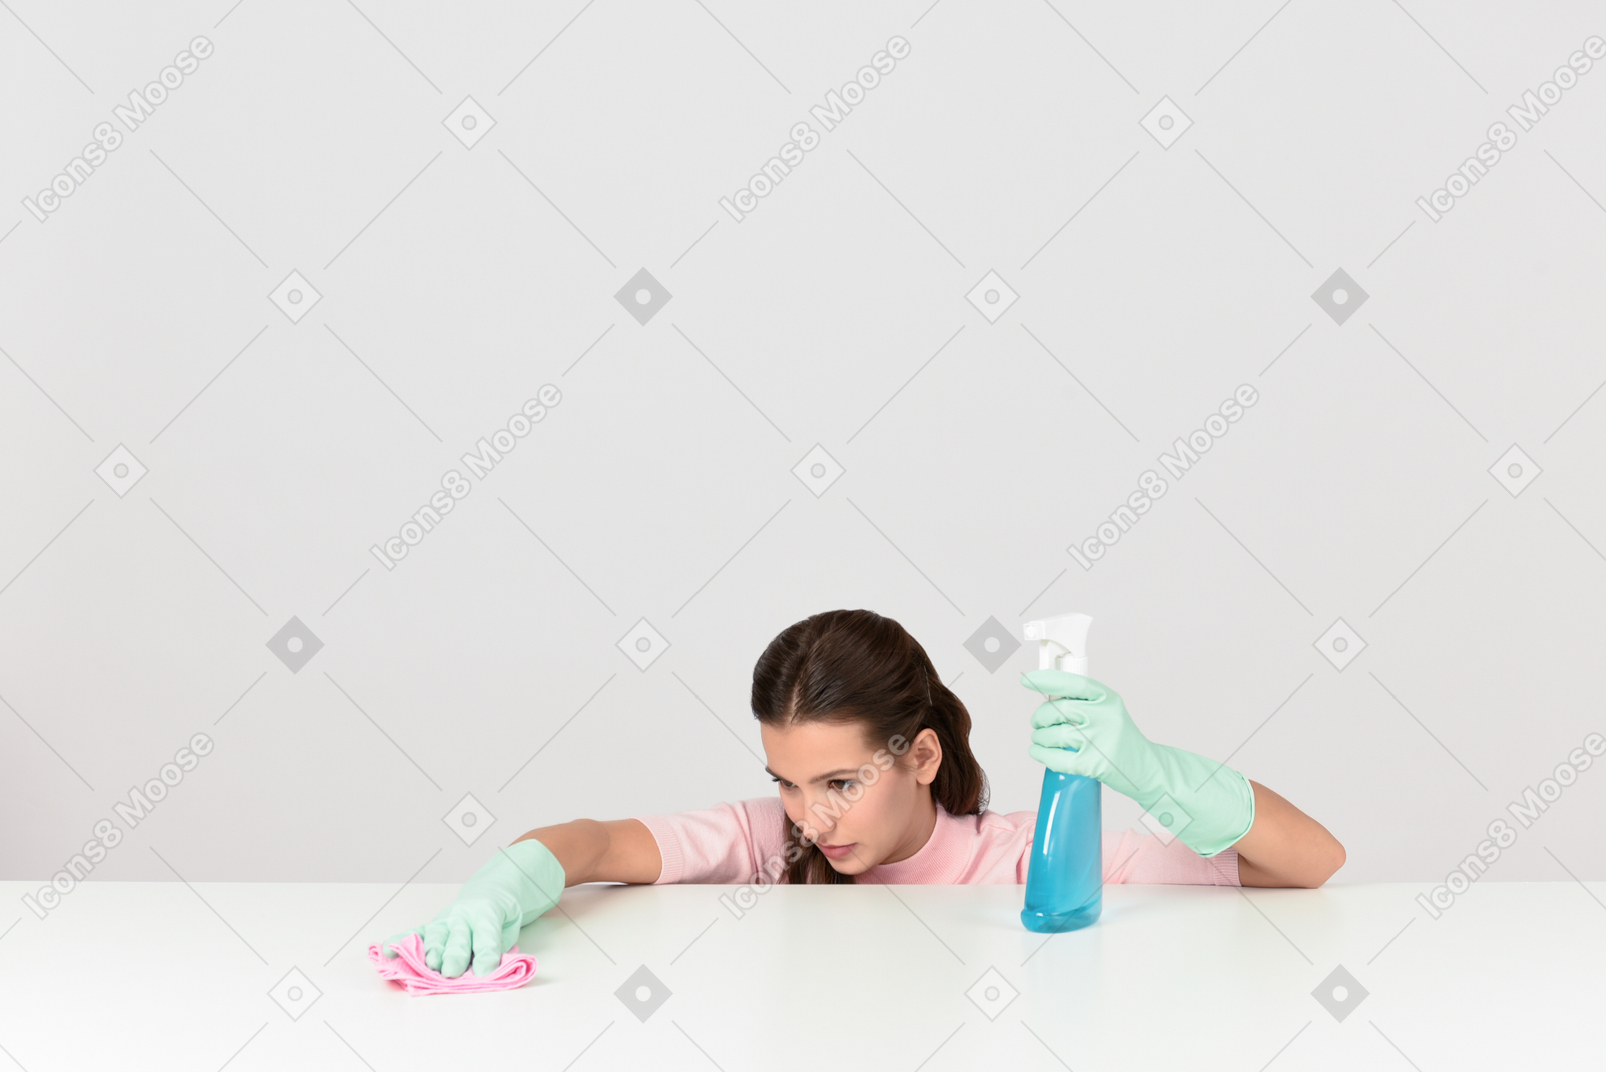 Attractive young woman dusting a surface